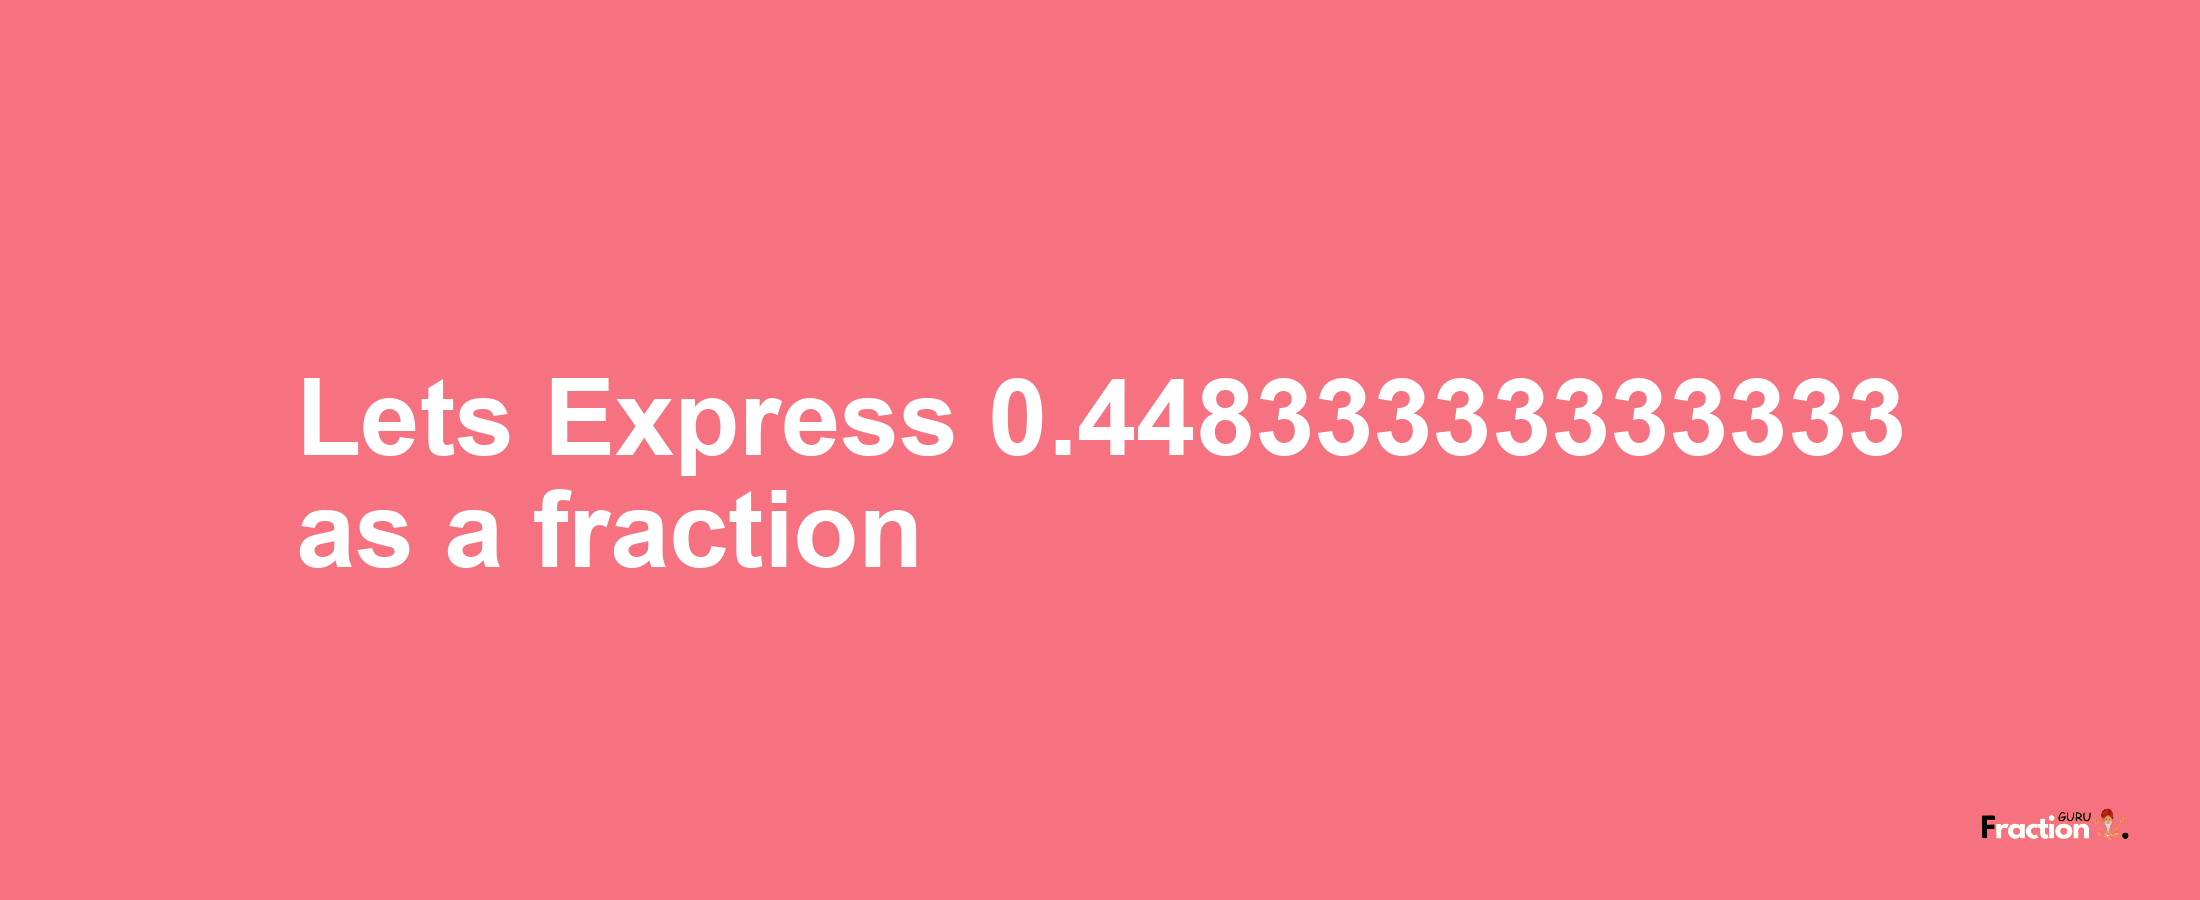 Lets Express 0.44833333333333 as afraction